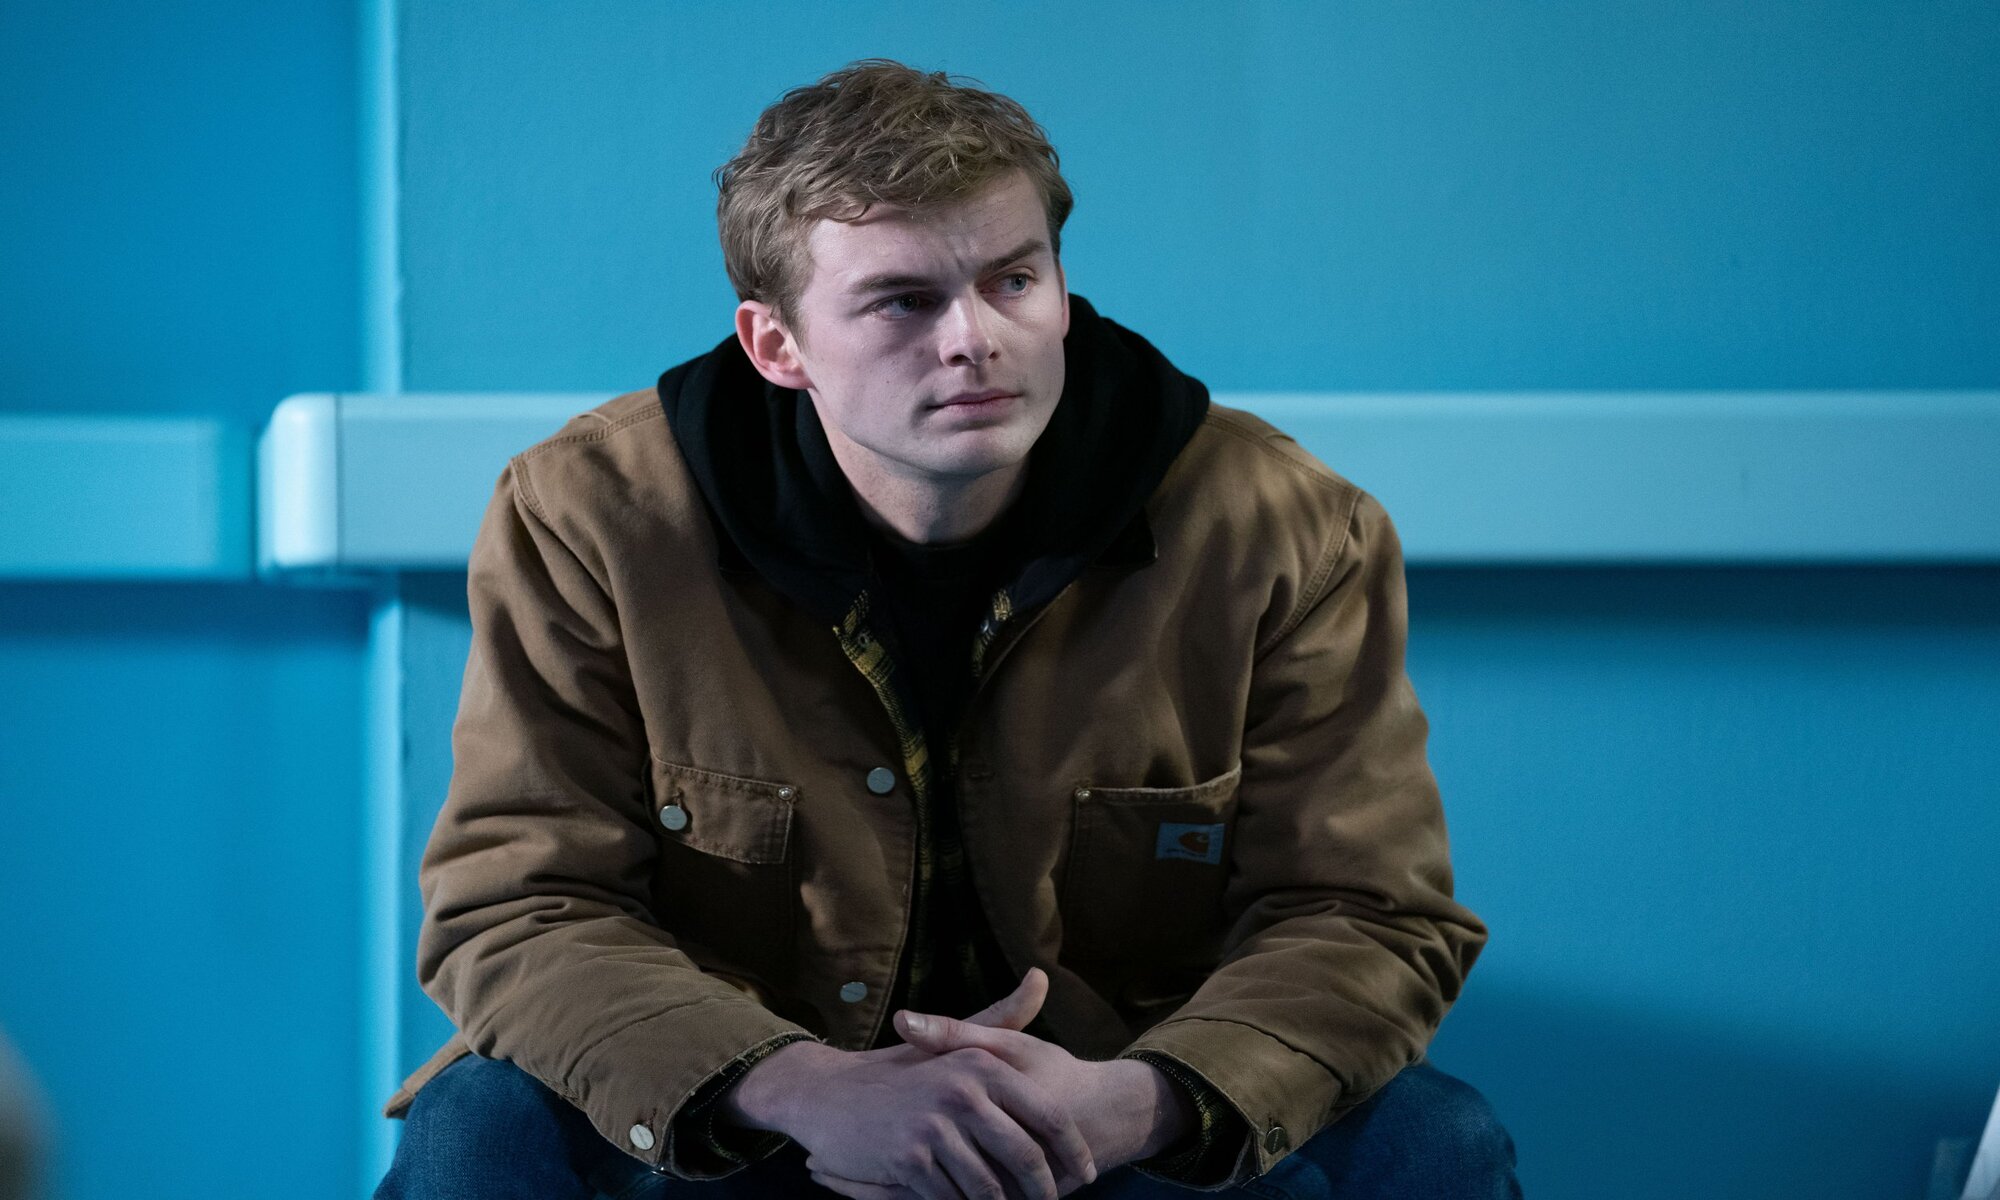 Peter Baele played by Hudson exits the series after being betrayed.